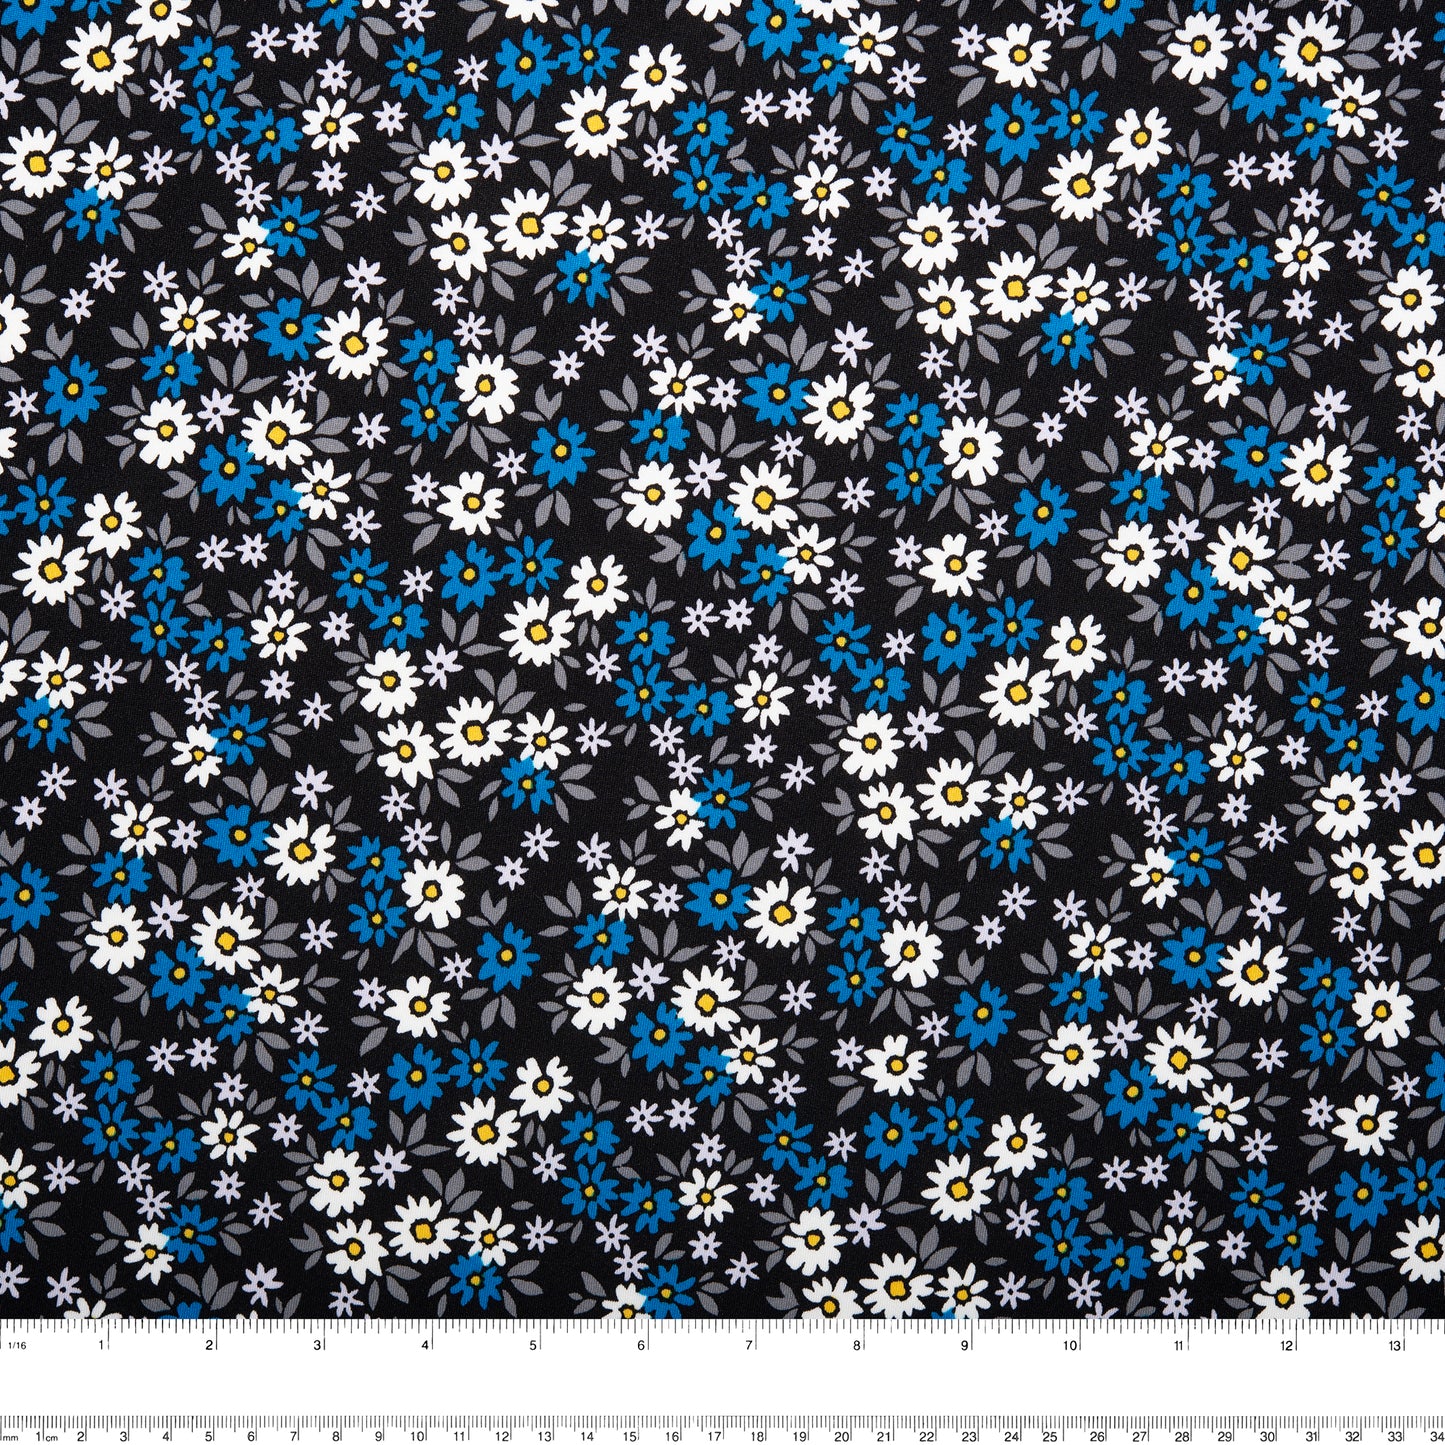 ITY Knit - CHARLOTTE - Daisies - Black / Blue